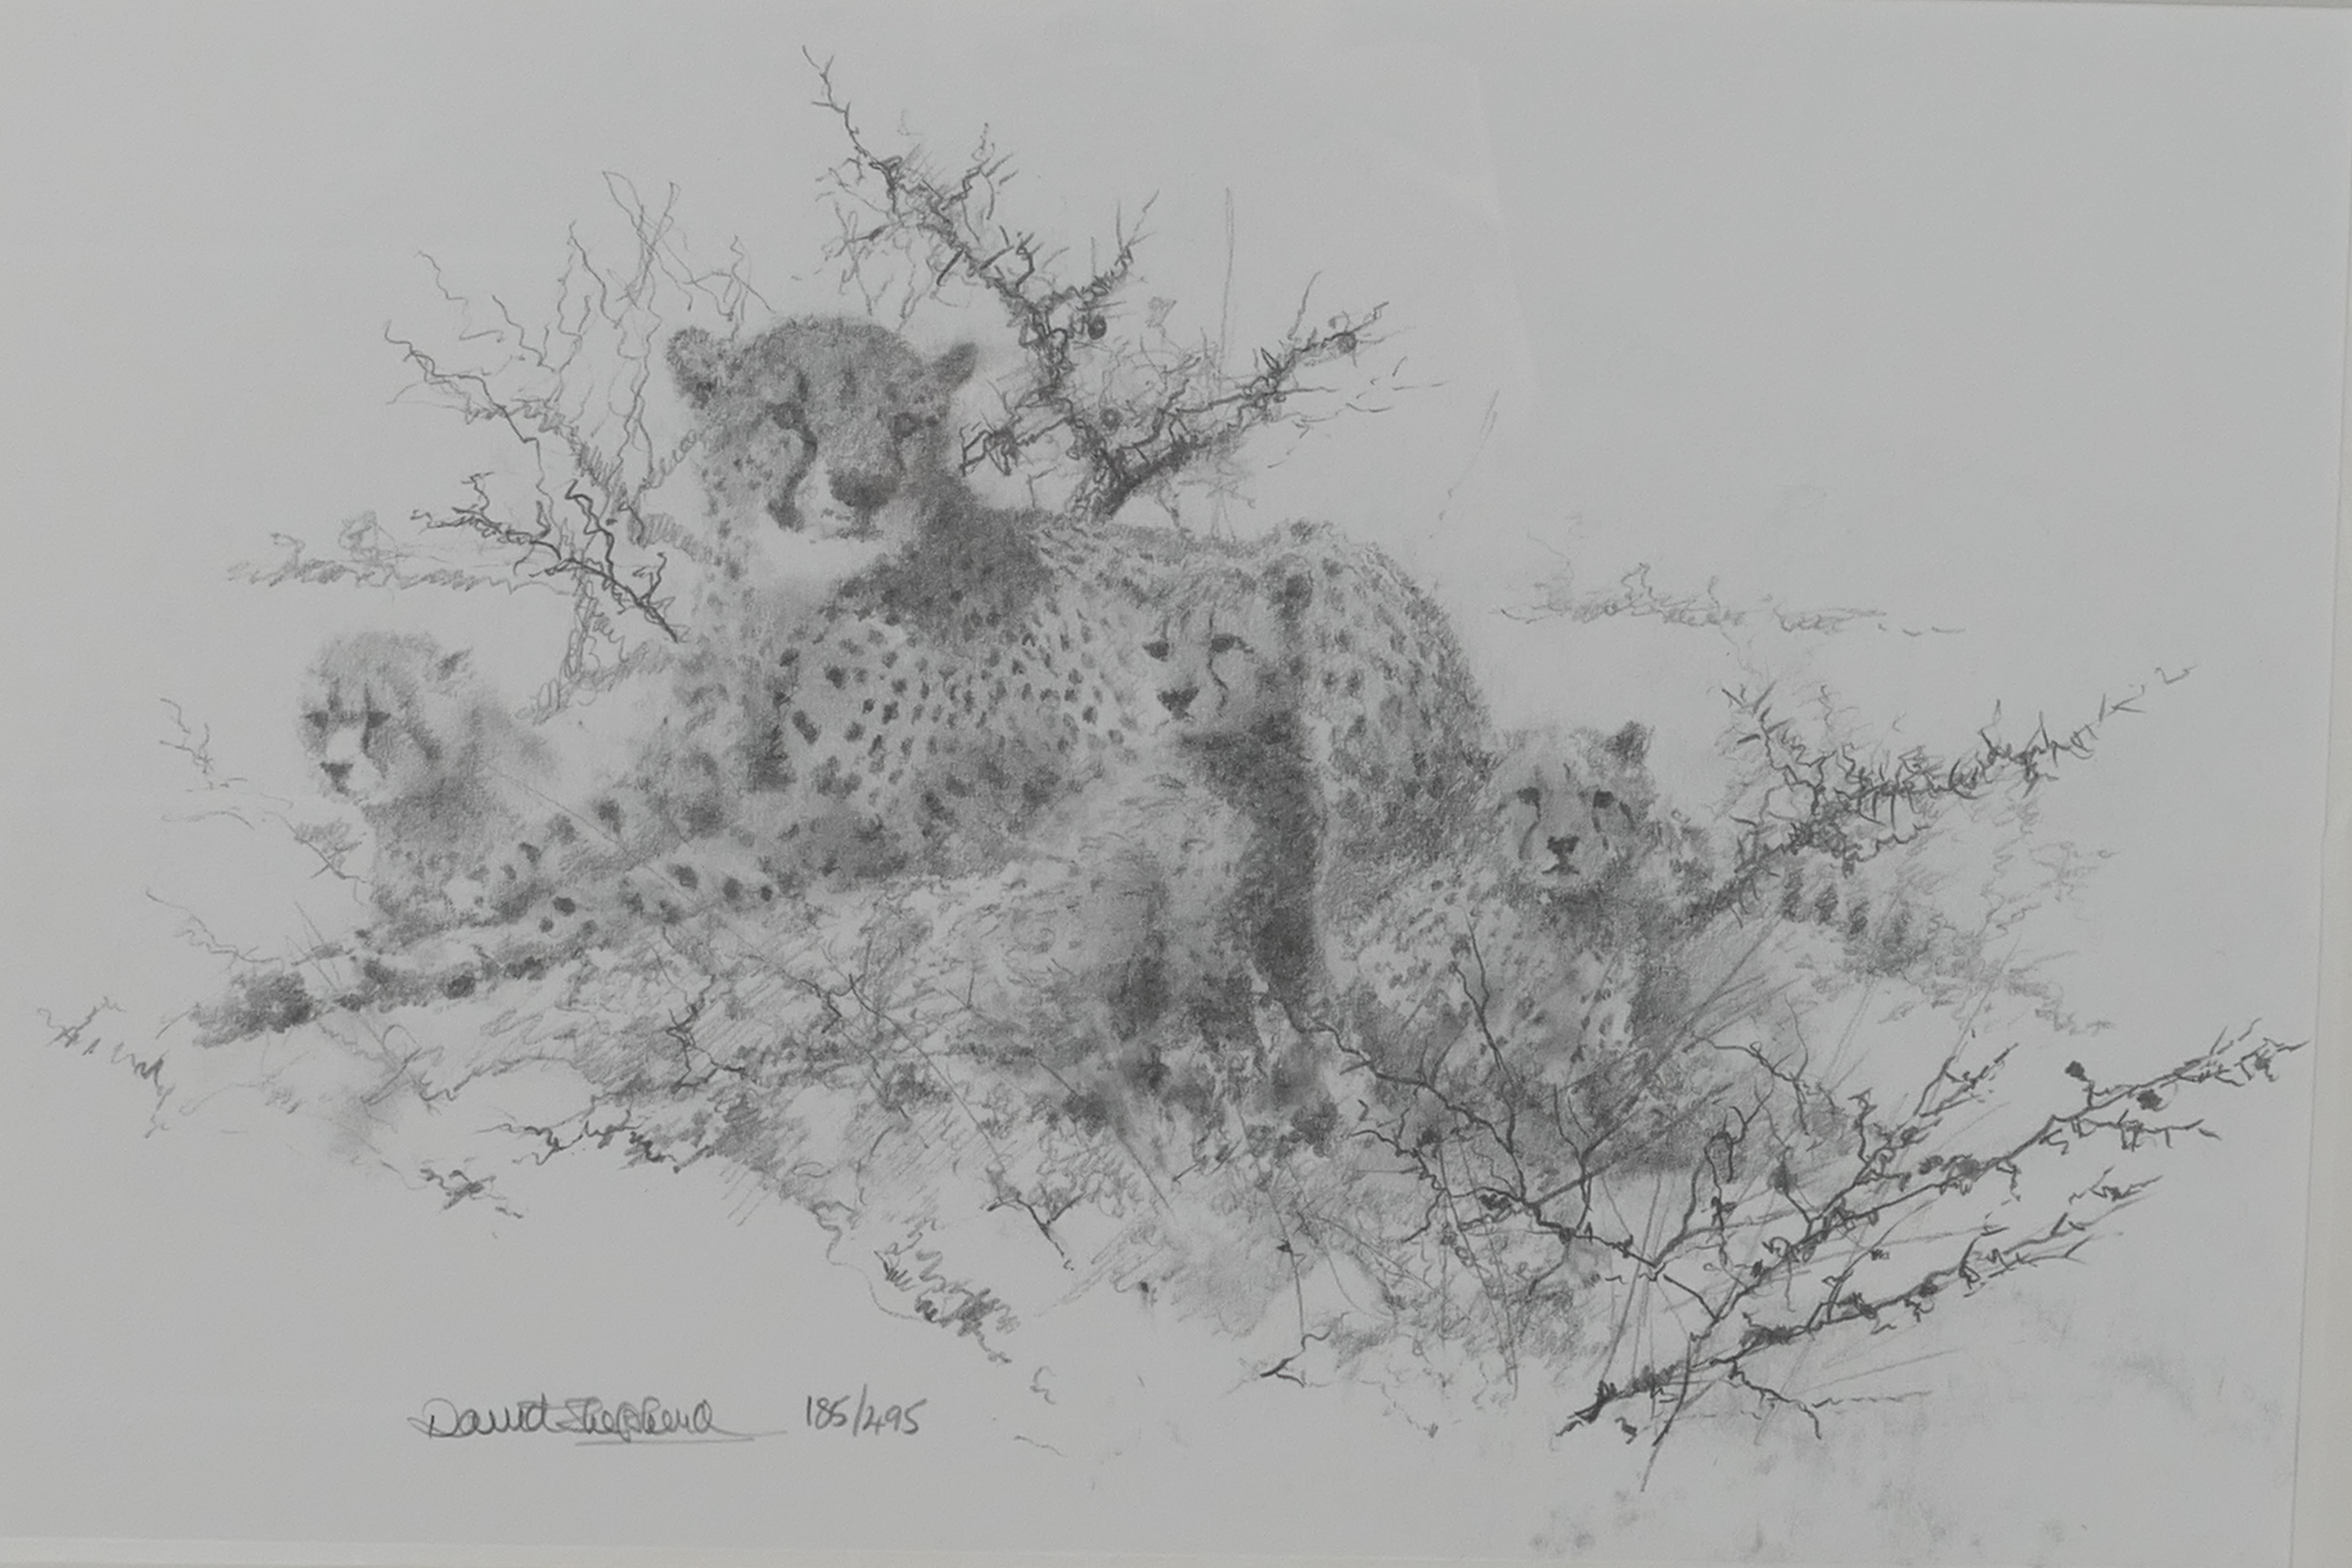 David Shepherd - A Soloman & Whitehead portfolio of four limited edition prints of pencil drawings, - Image 4 of 11